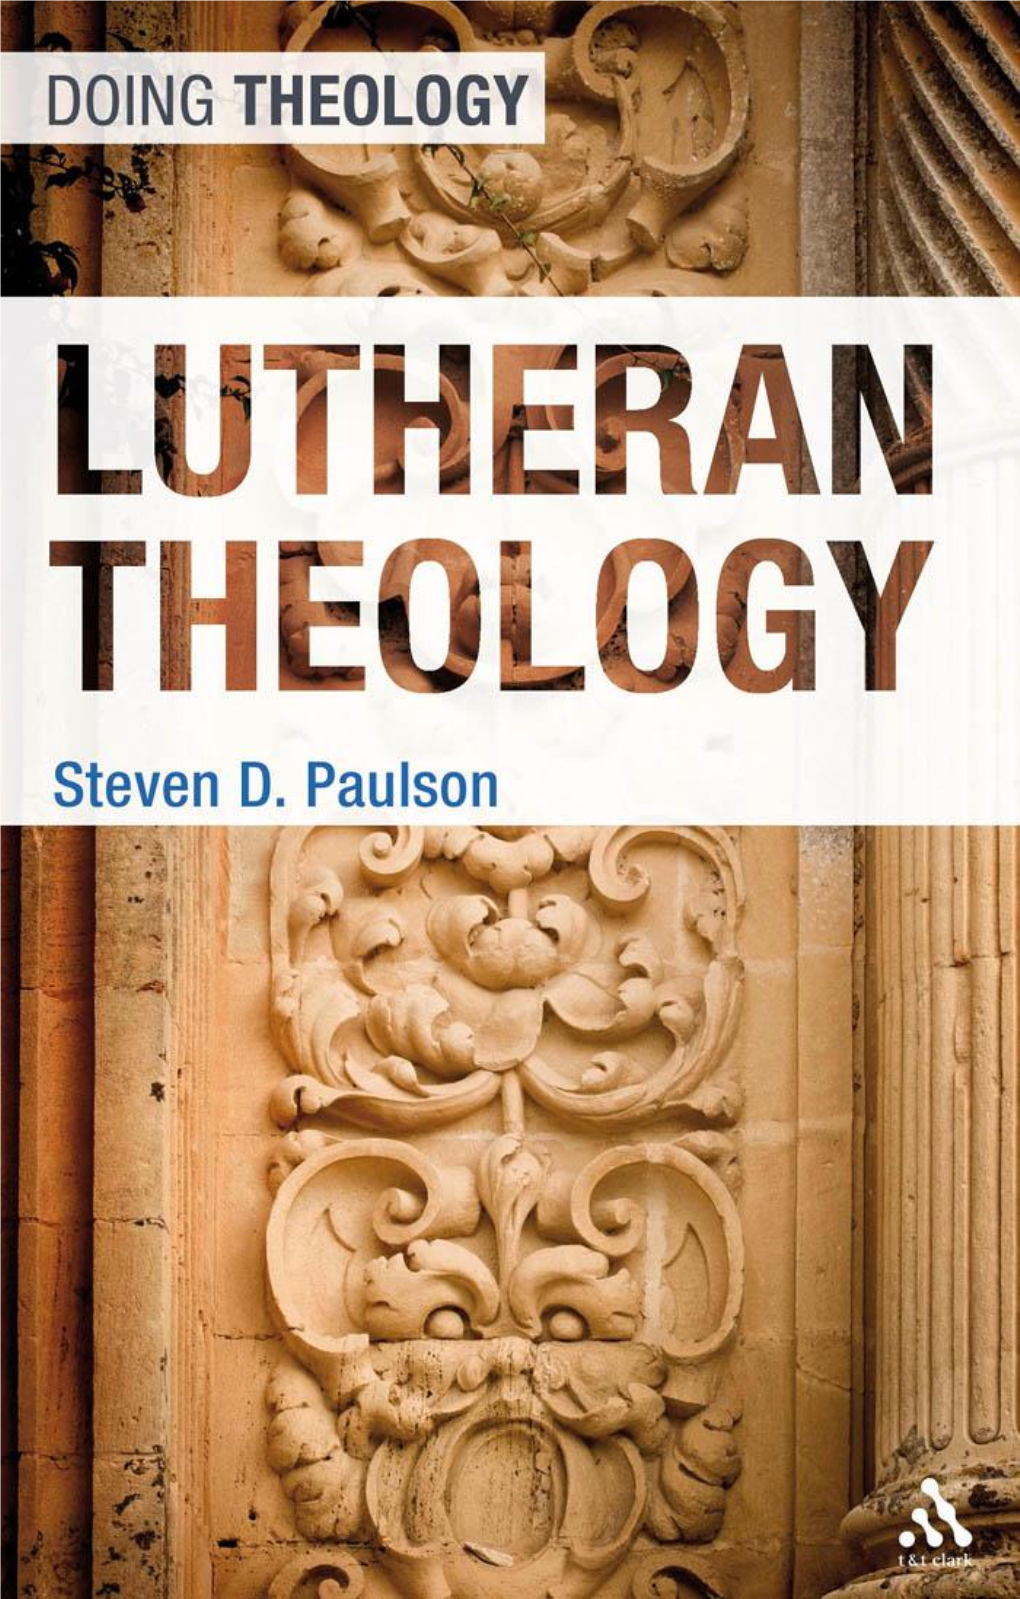 Lutheran Theology “Doing Theology” Introduces the Major Christian Traditions and Their Way of Theological Reflection